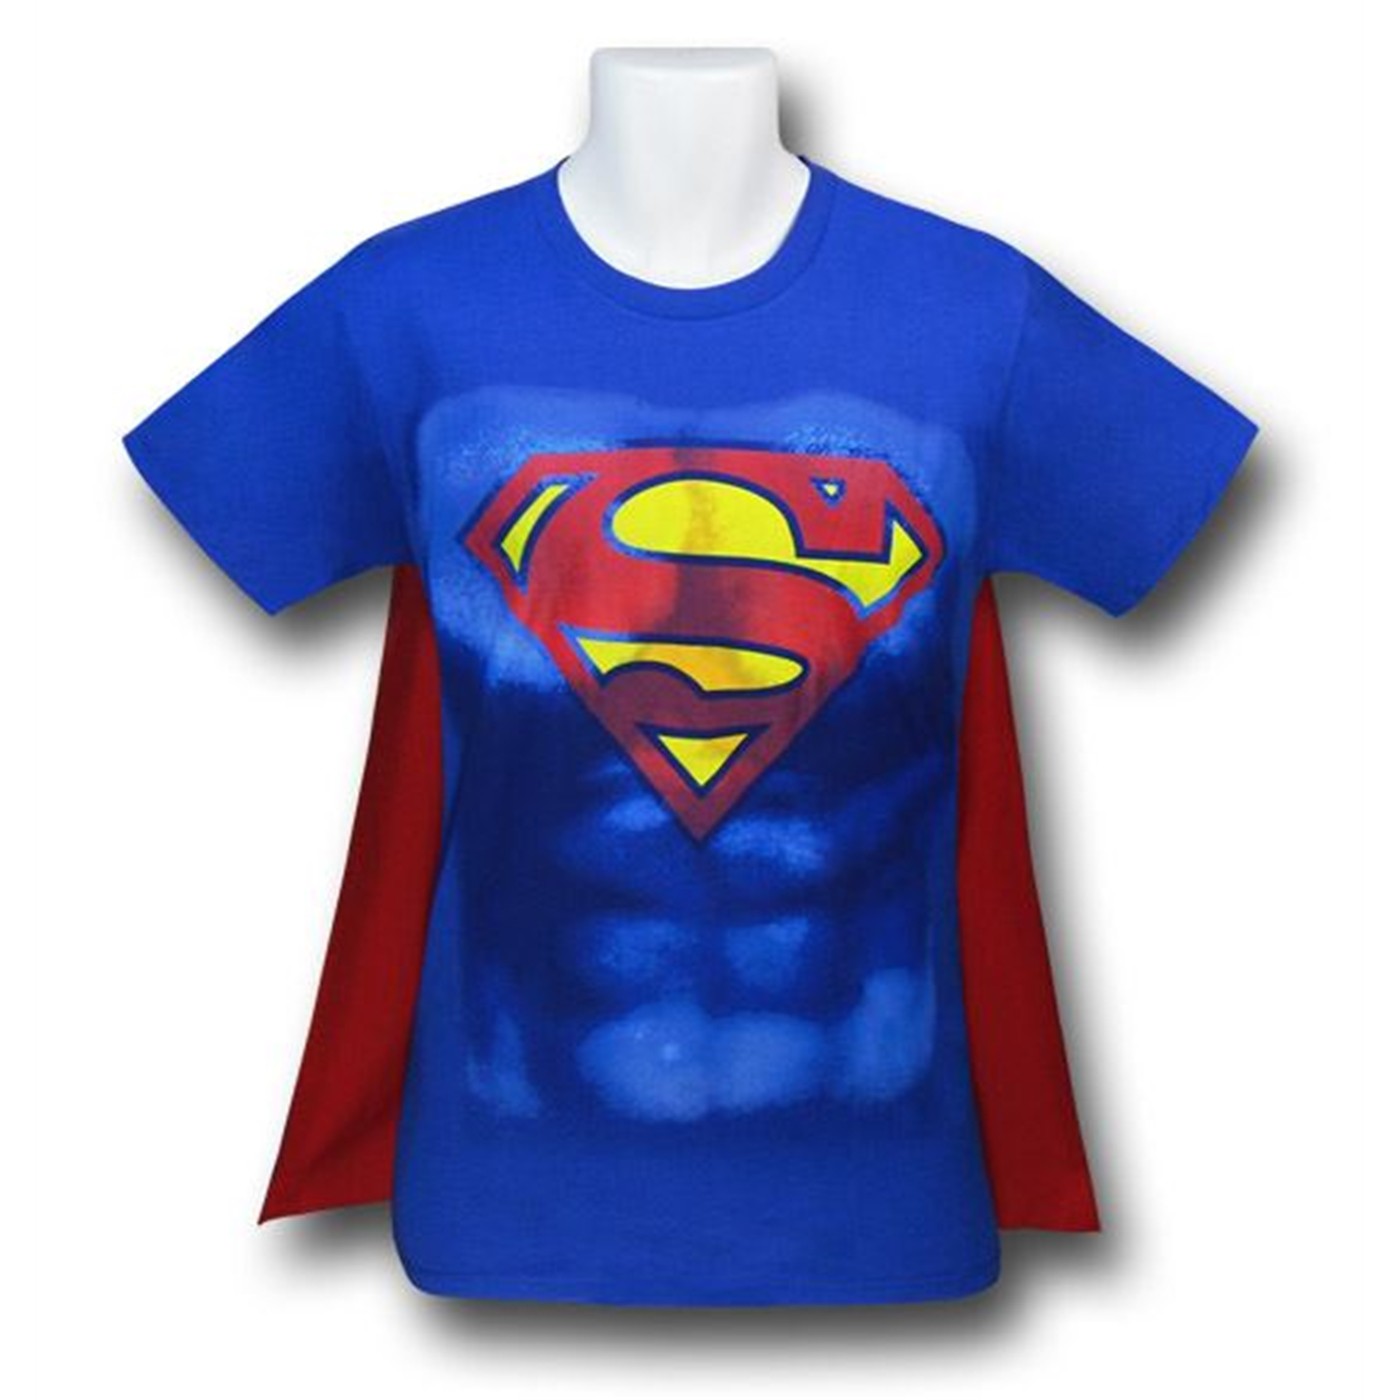 bjerg Kor morfin Superman Costume with Muscles and Cape T-Shirt